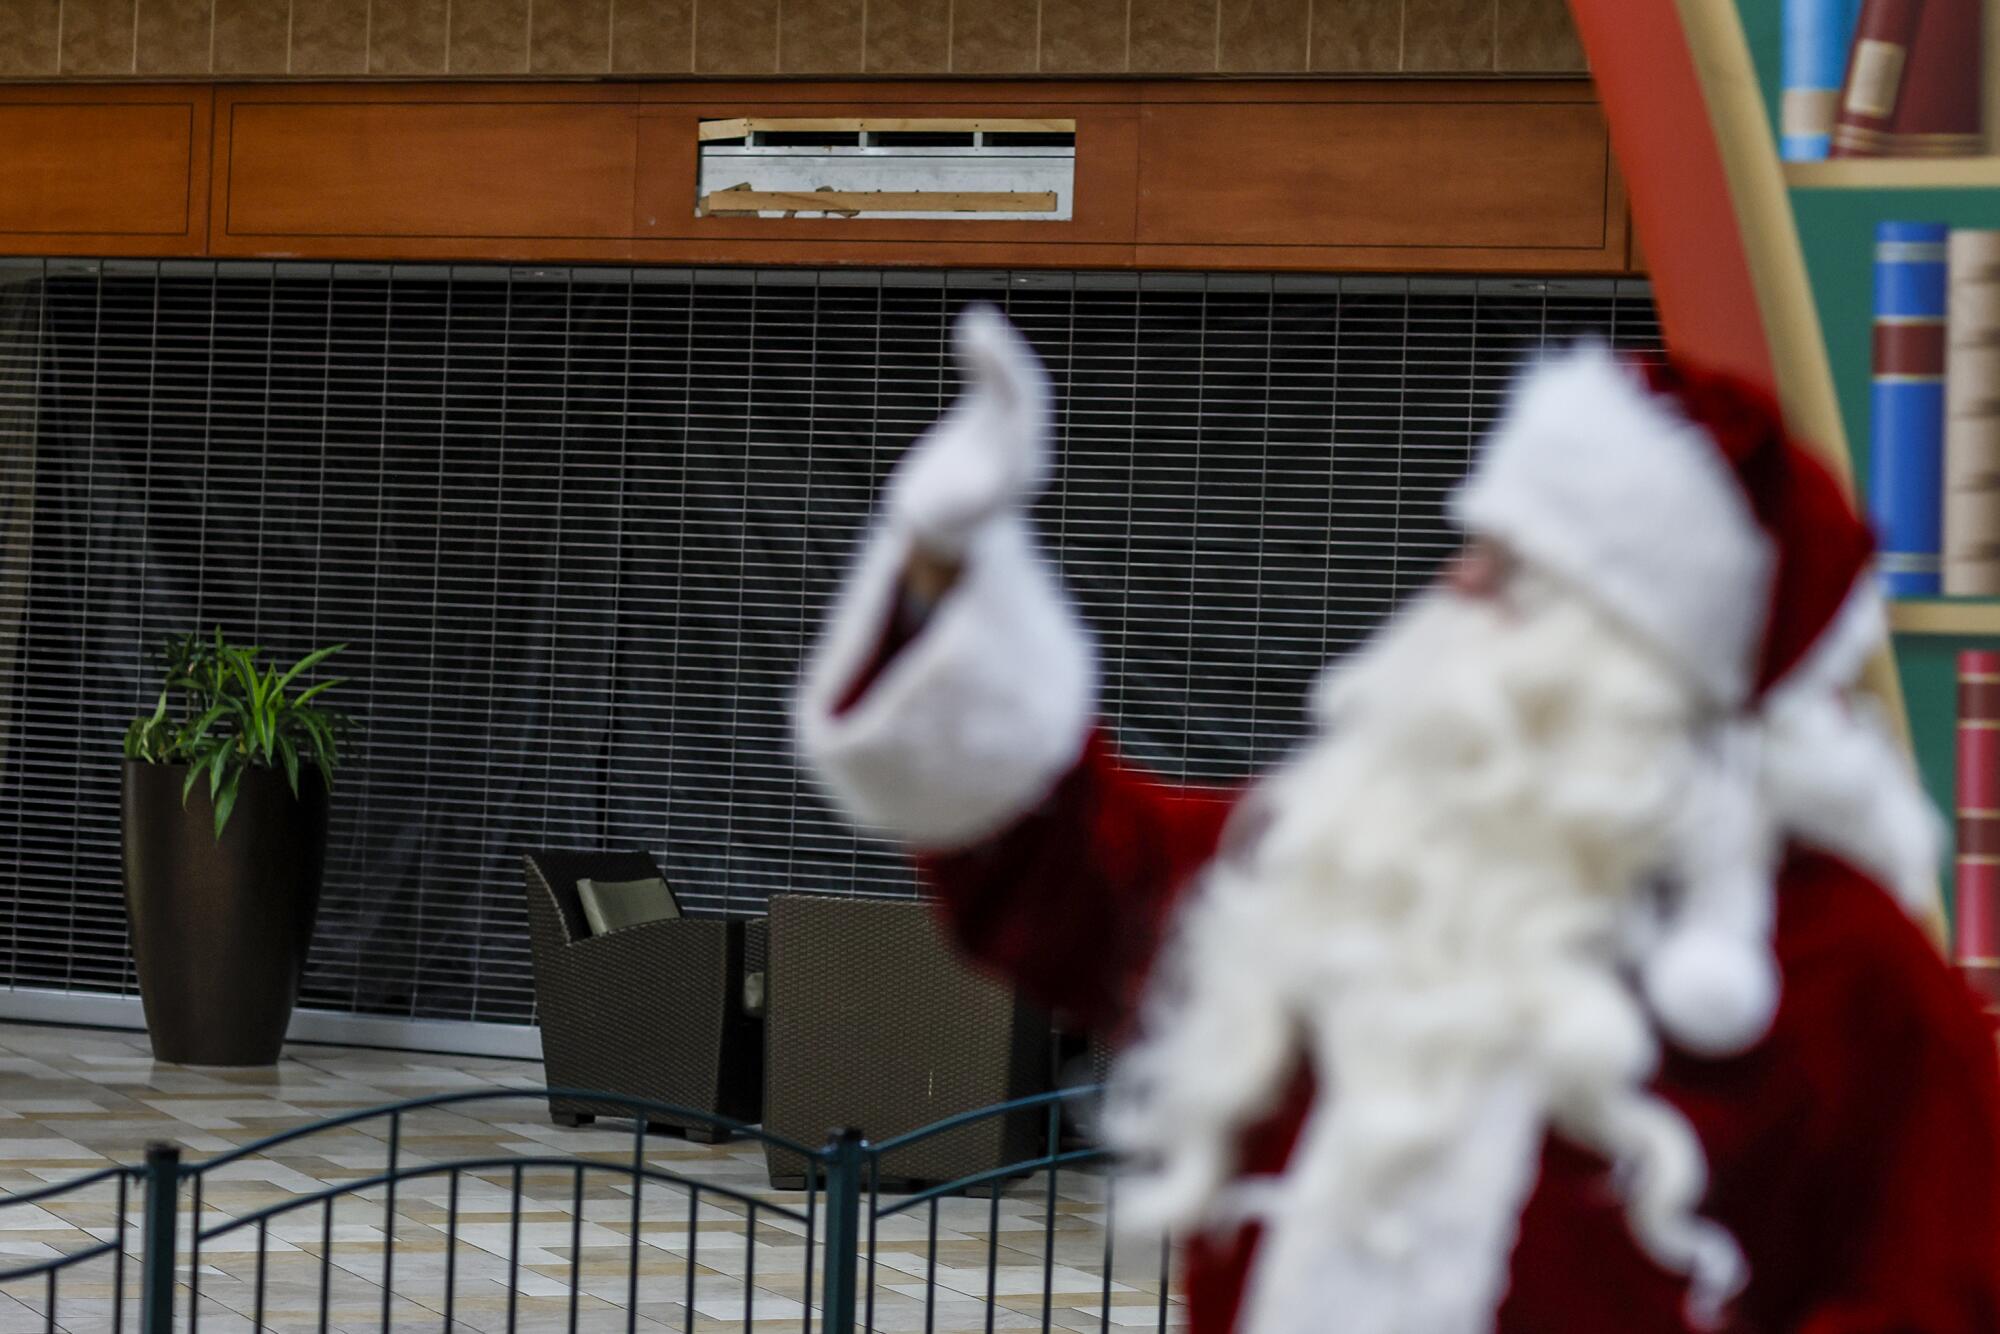 Santa, a.k.a. Albert Sanchez, waves at children across from one of many shuttered stores at the Puente Hills Mall.